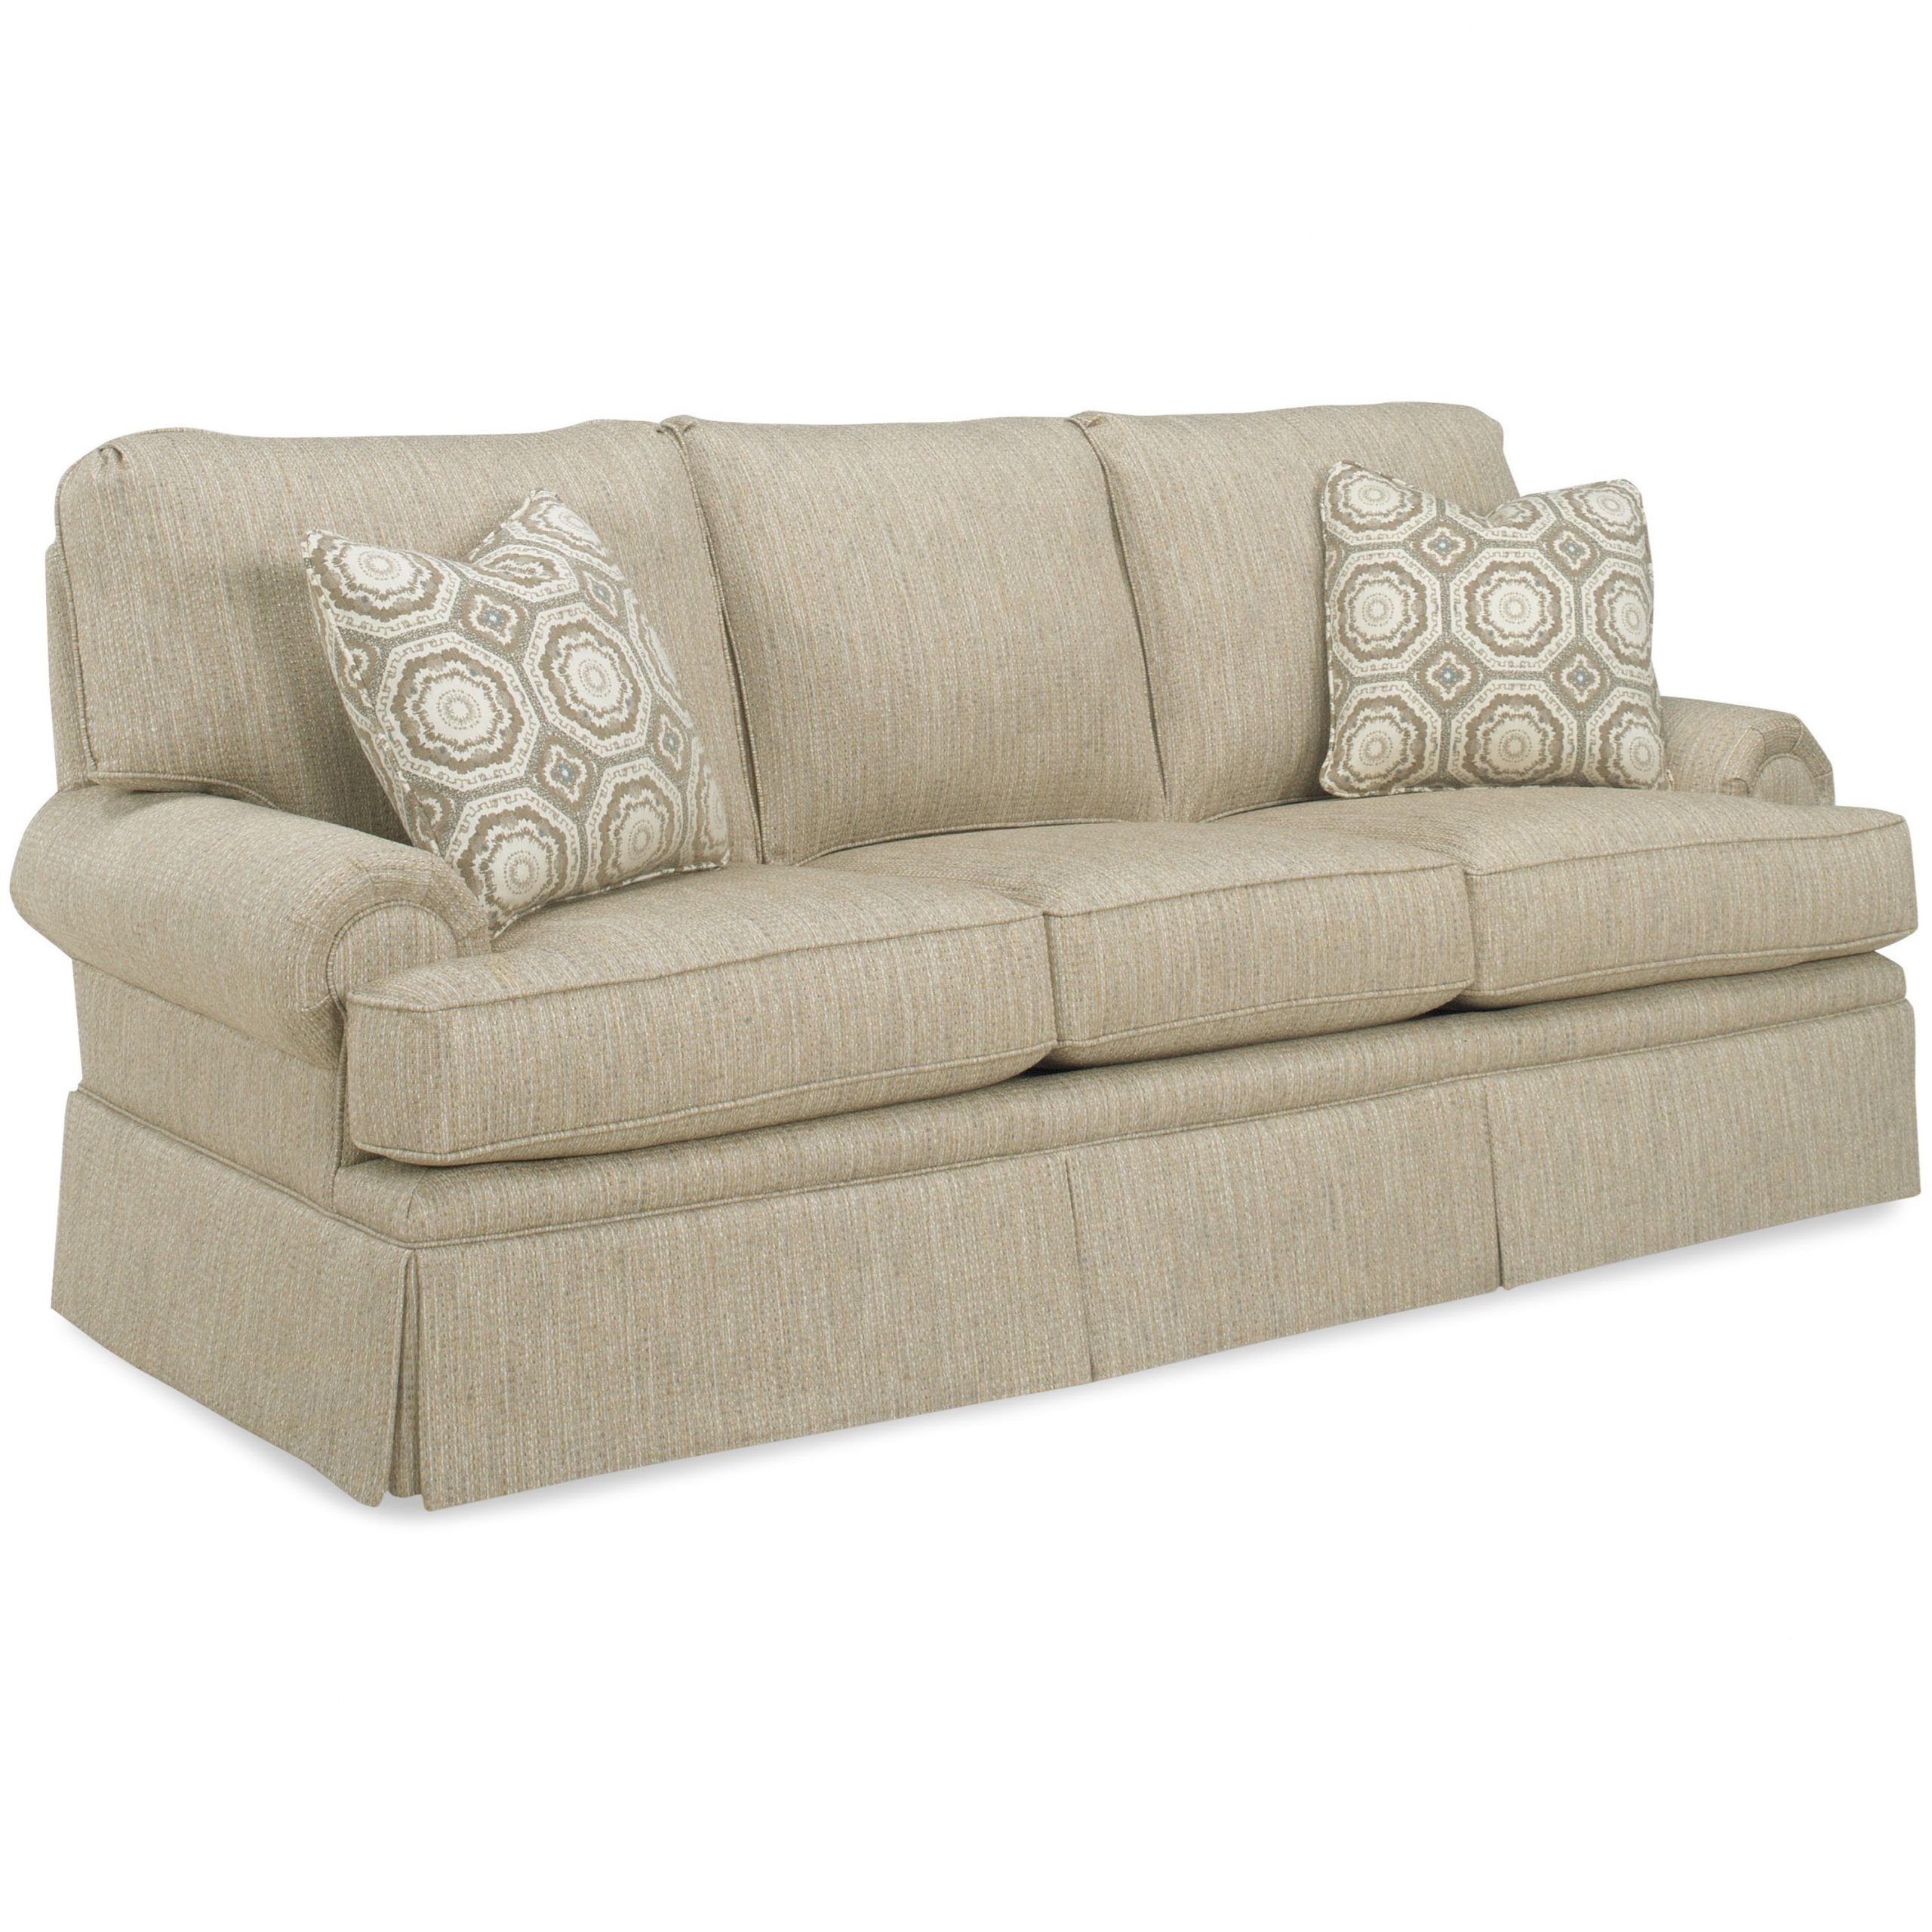 Temple Furniture Winston Sofa With Skirt | Mueller Inside Winston Sofa Sectional Sofas (View 5 of 15)